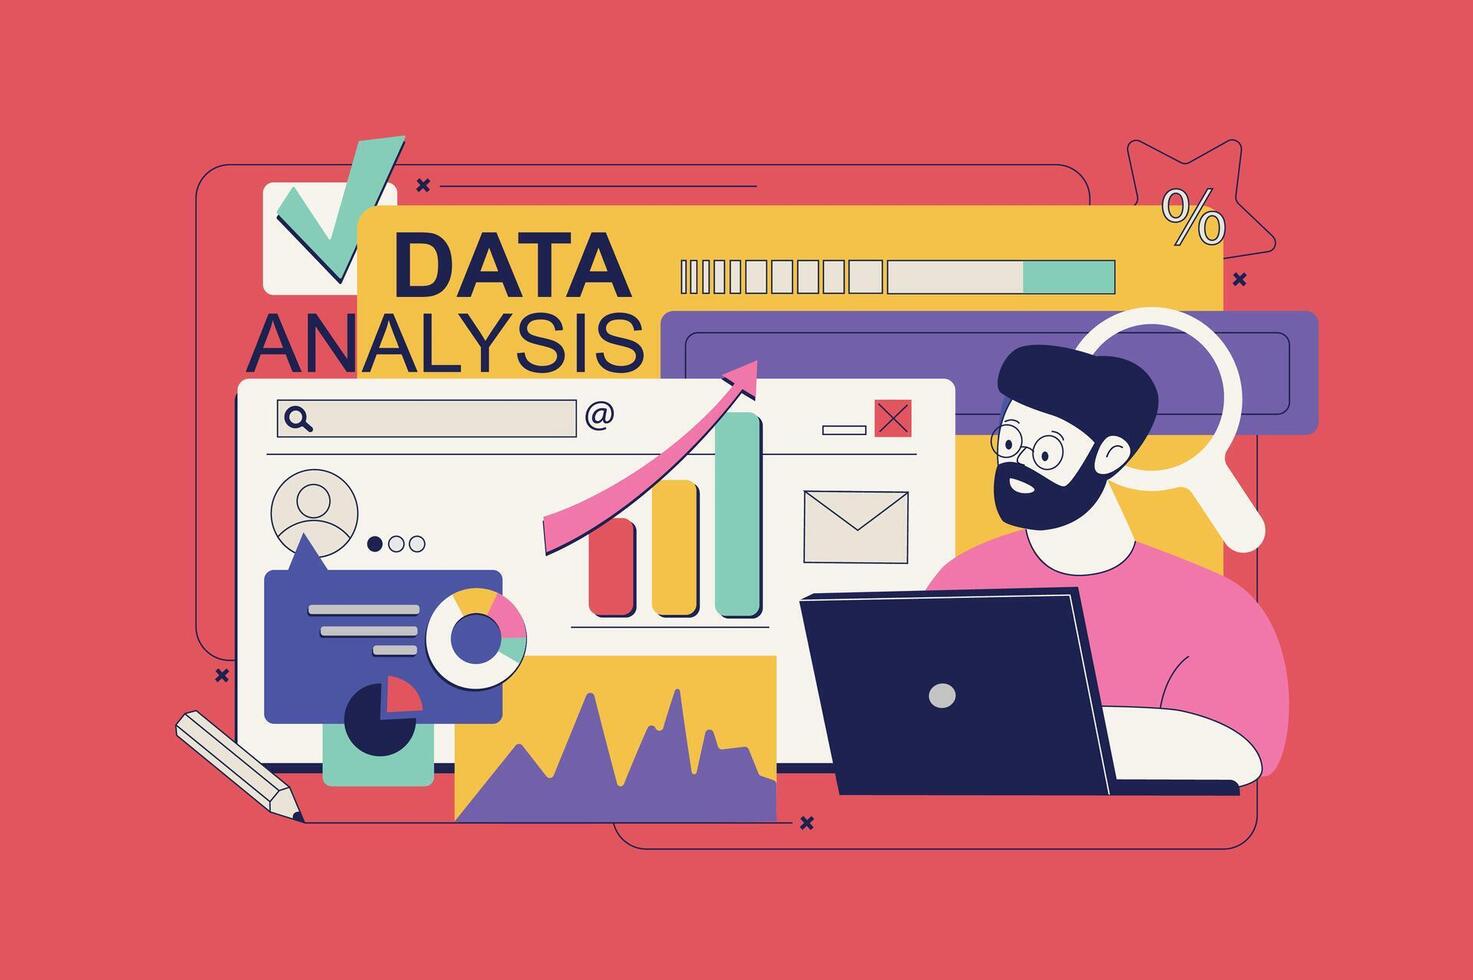 Data analysis concept in flat neo brutalism design for web. Man researching statistic diagrams or charts, searching information online. Vector illustration for social media banner, marketing material.